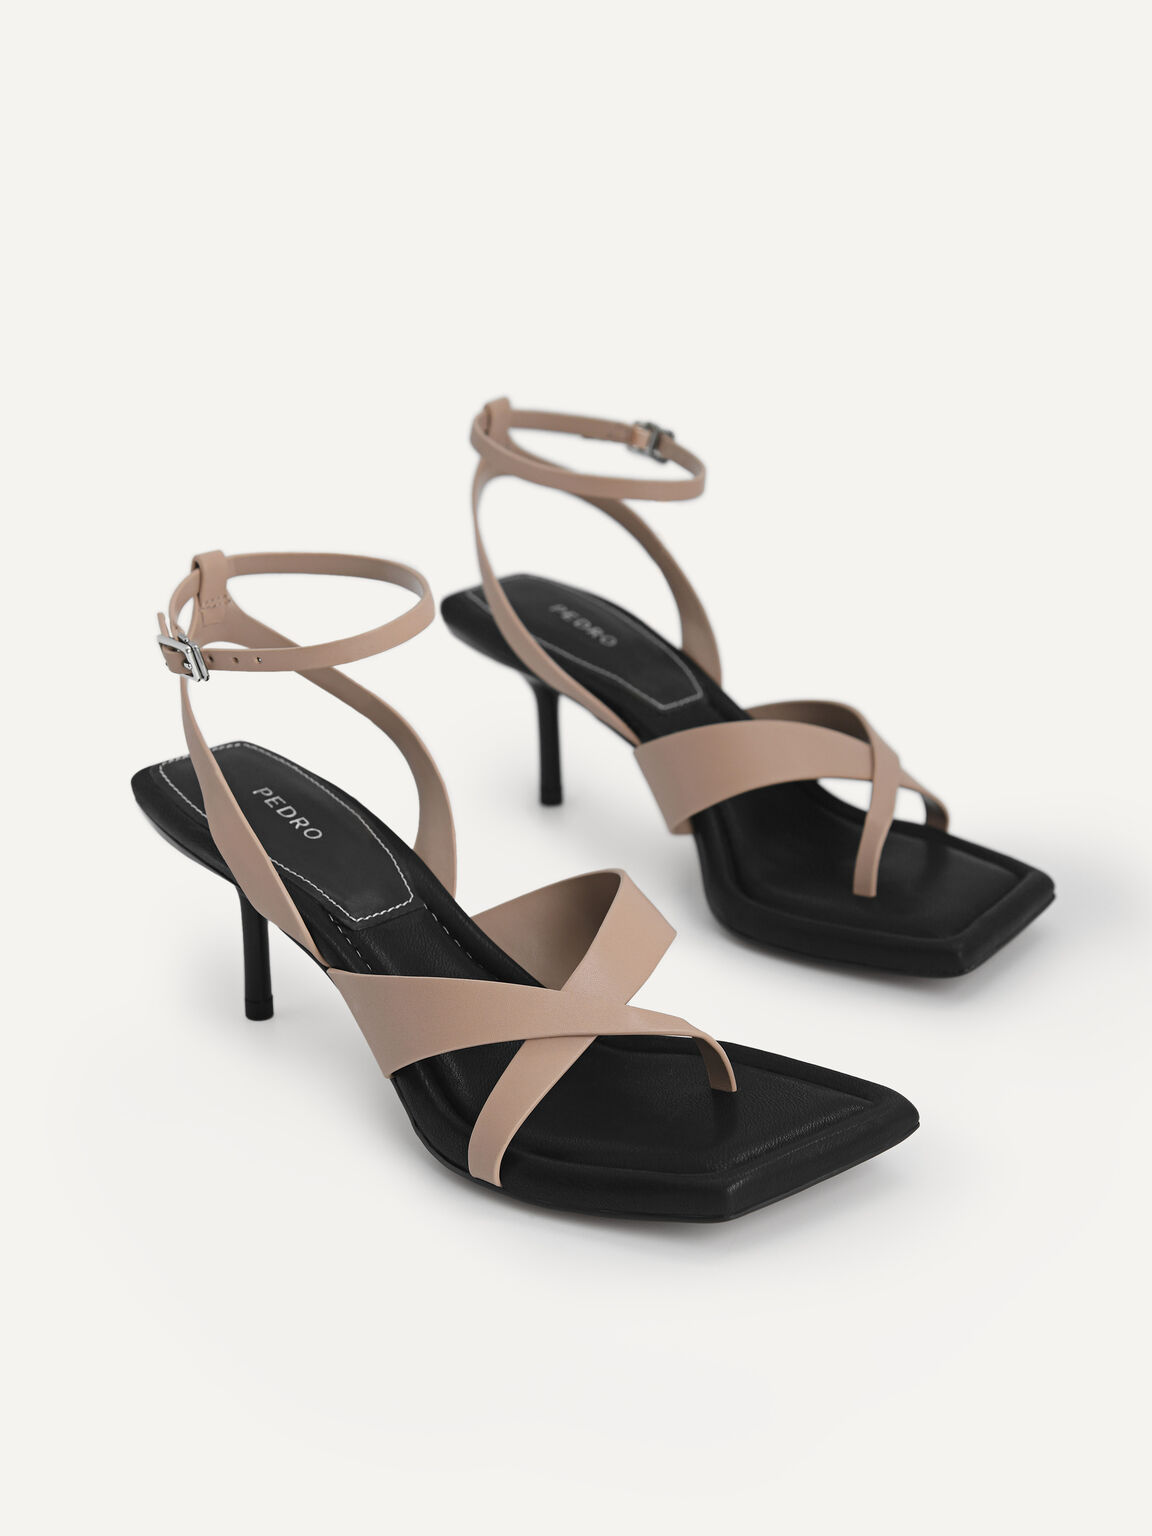 Strappy Square-Toe Heel Sandals, Taupe